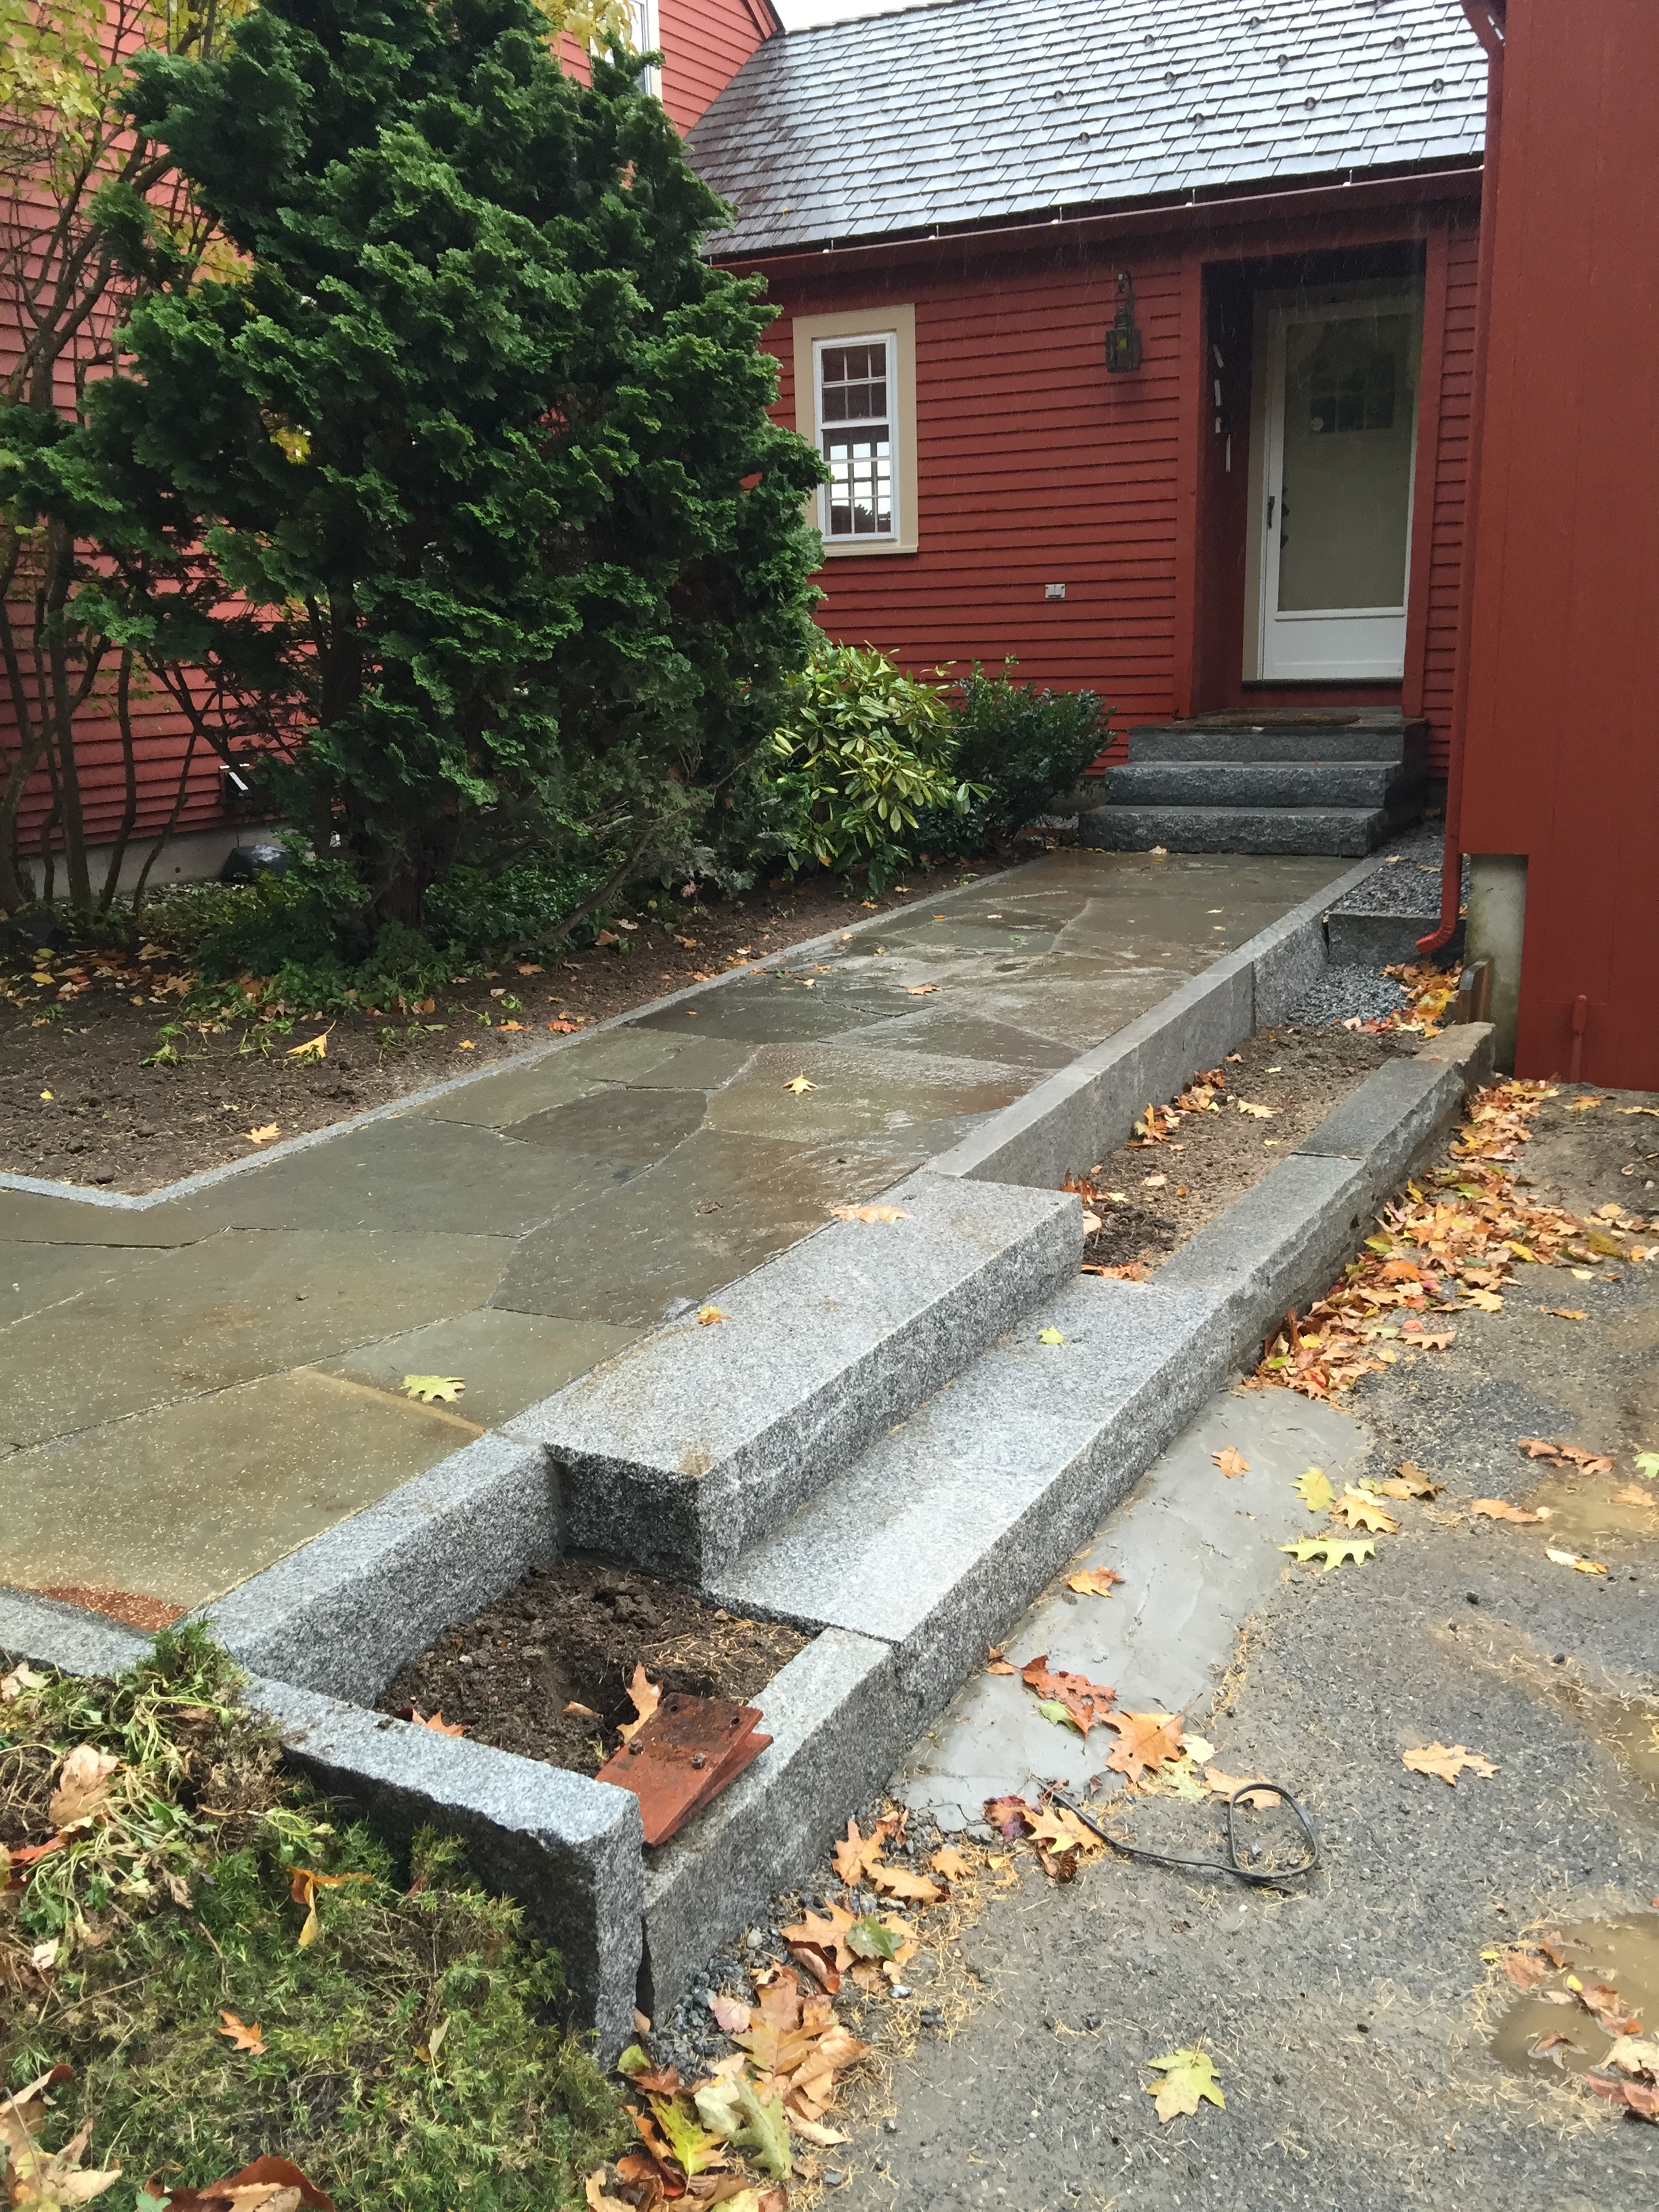 Curbing, Steps and Path to Entry Door